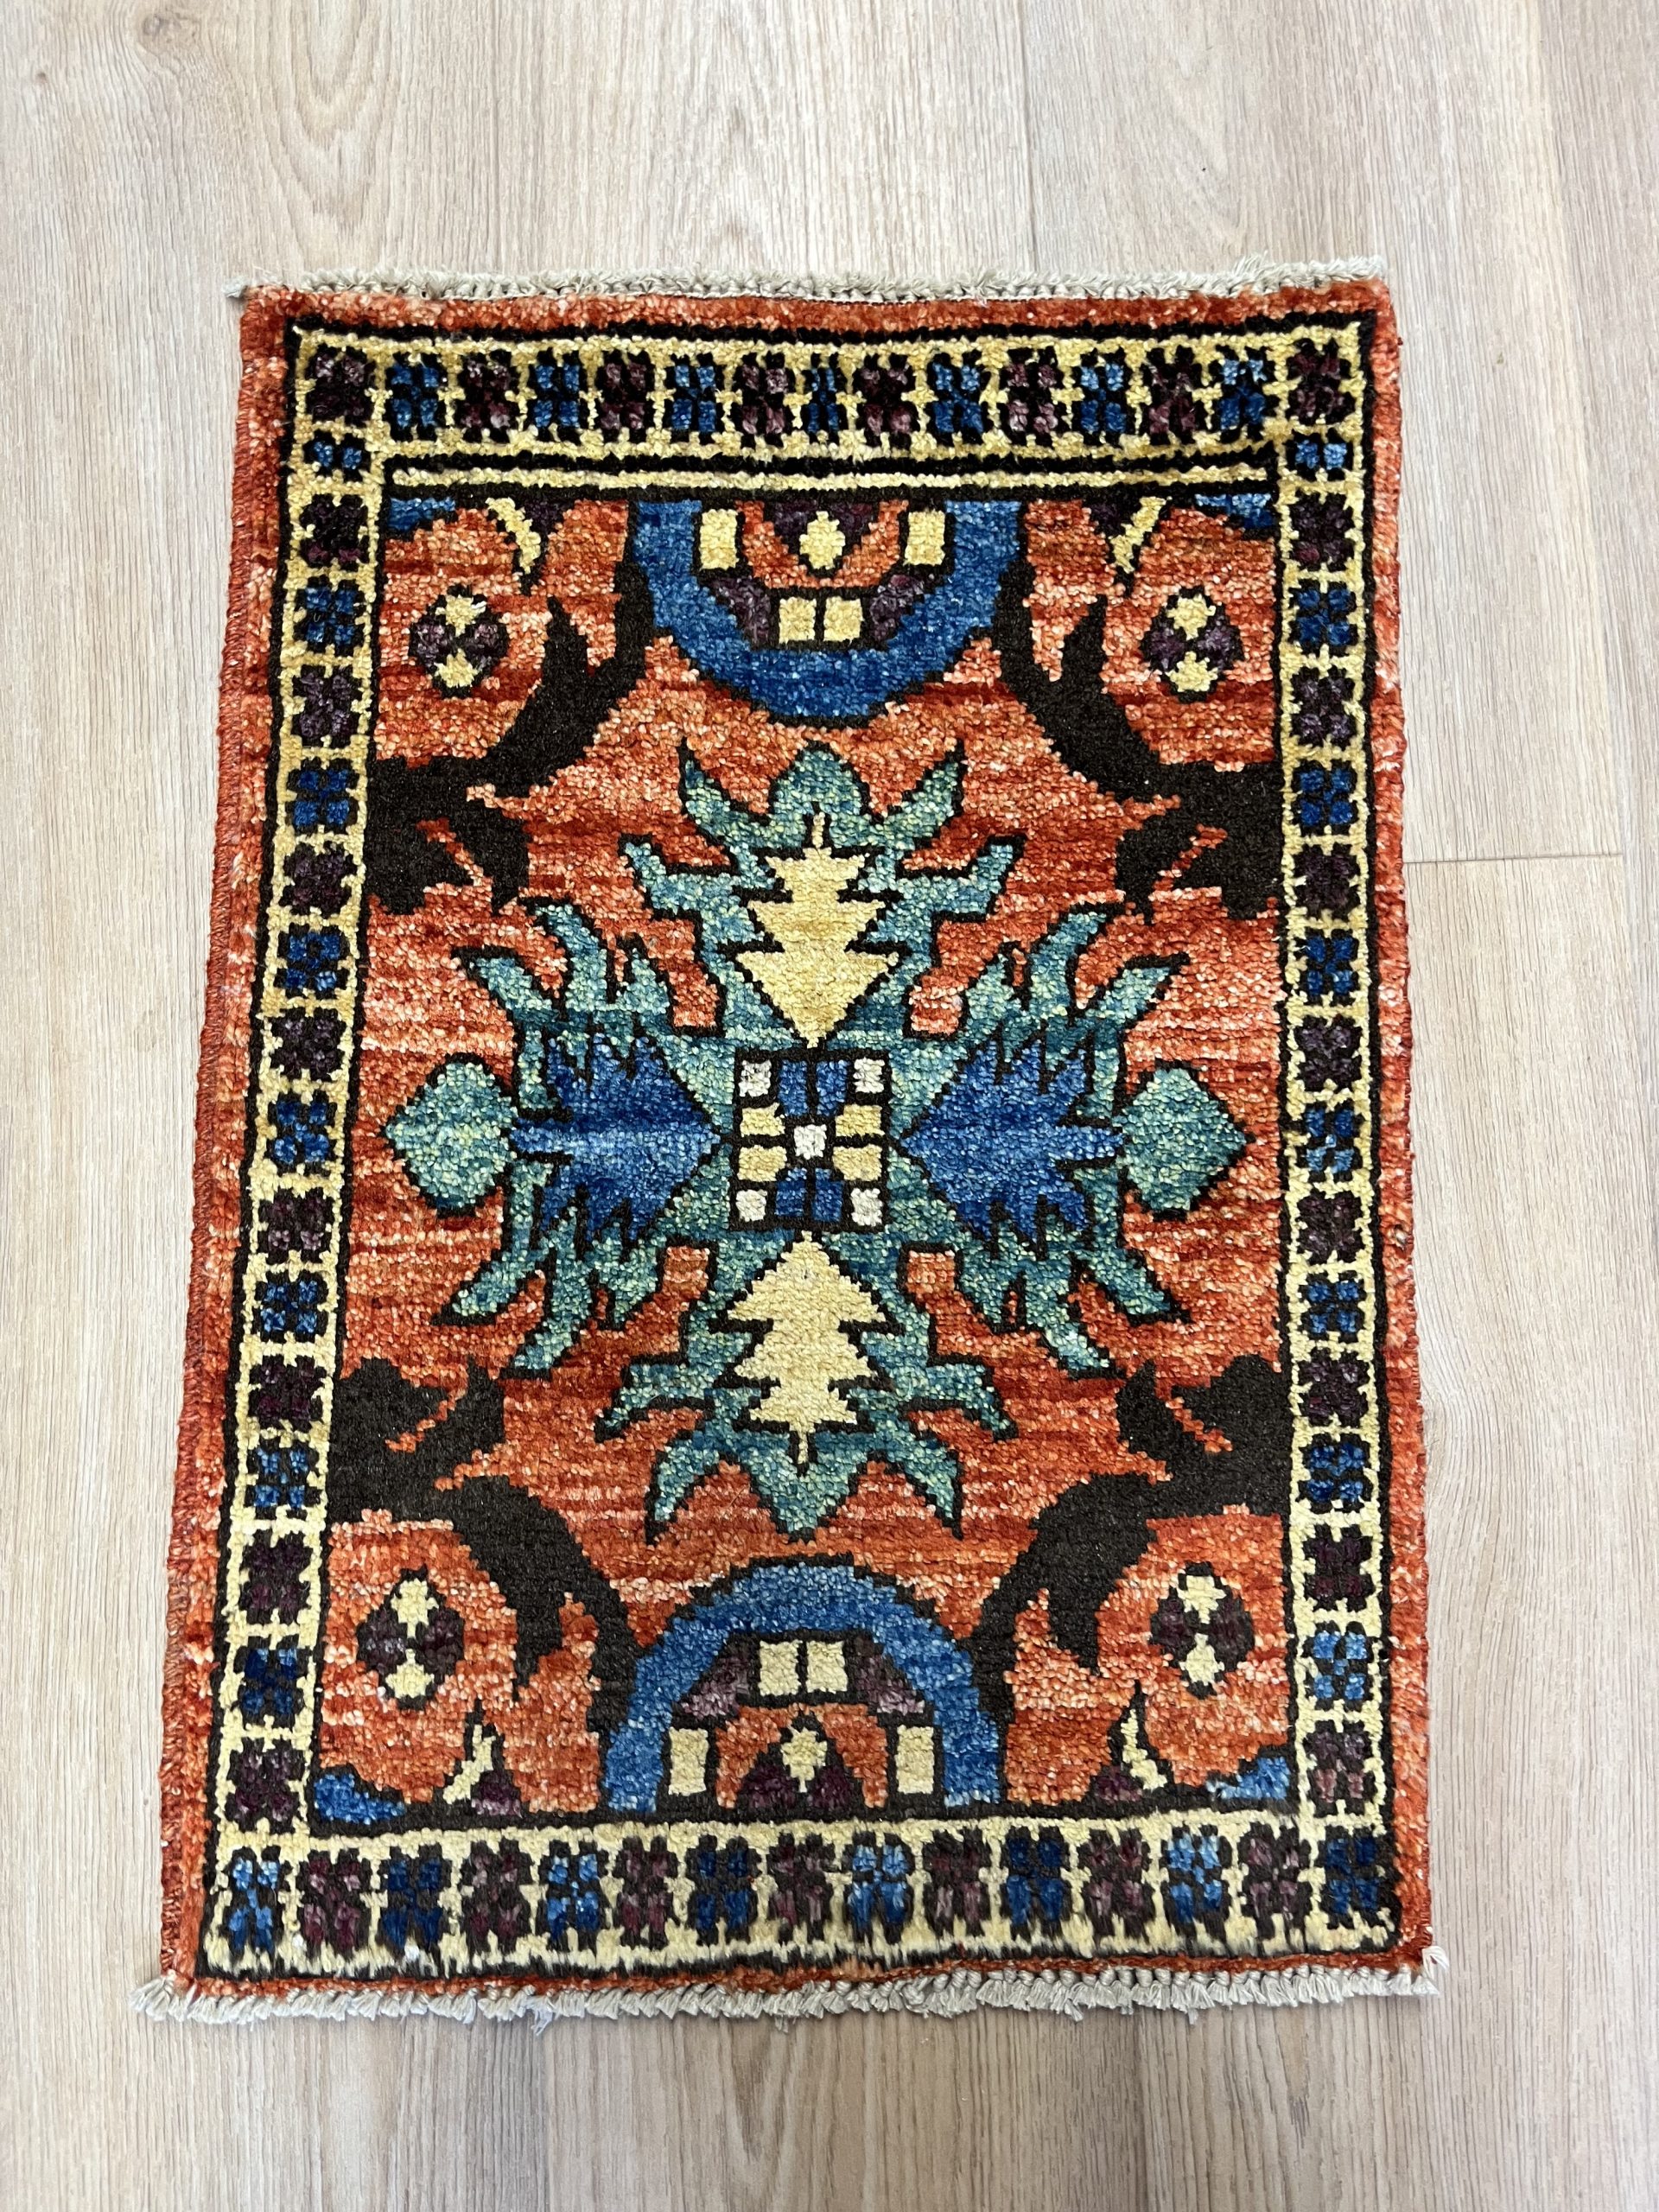 Oriental Persian Afghan And Middle Eastern Rugs Carpets